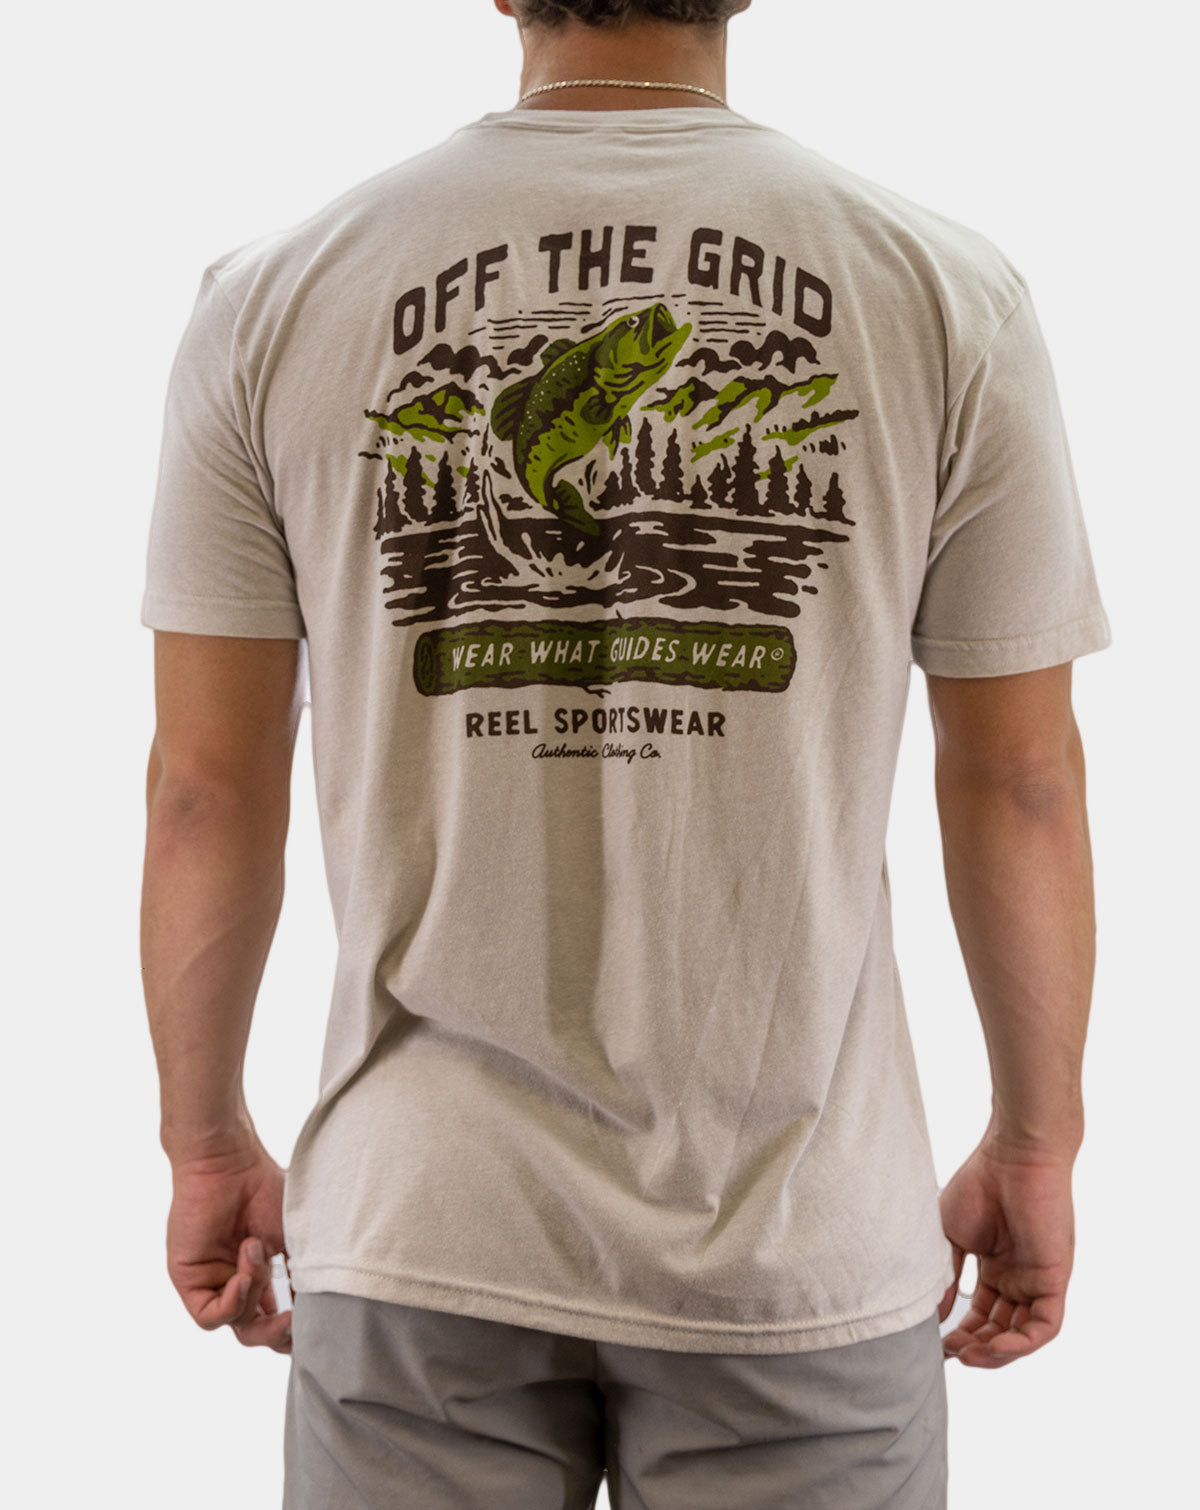 fishing tshirt - Sports Wear Prices and Promotions - Men Clothes